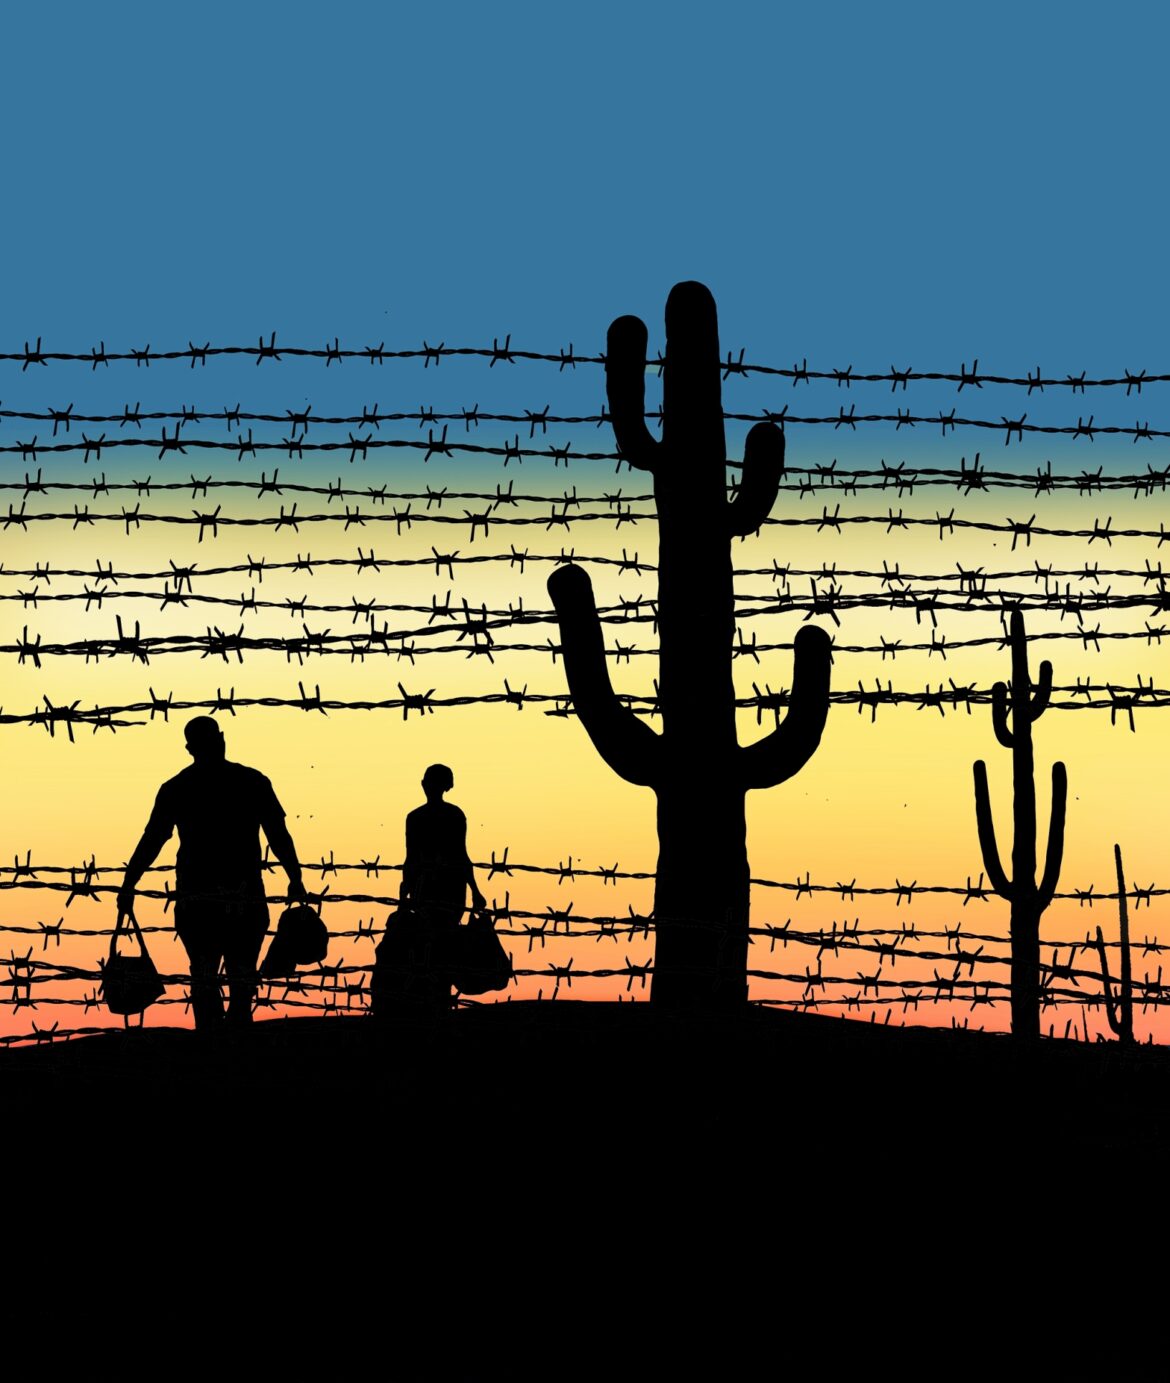 Silhouettes of two people crossing the desert.